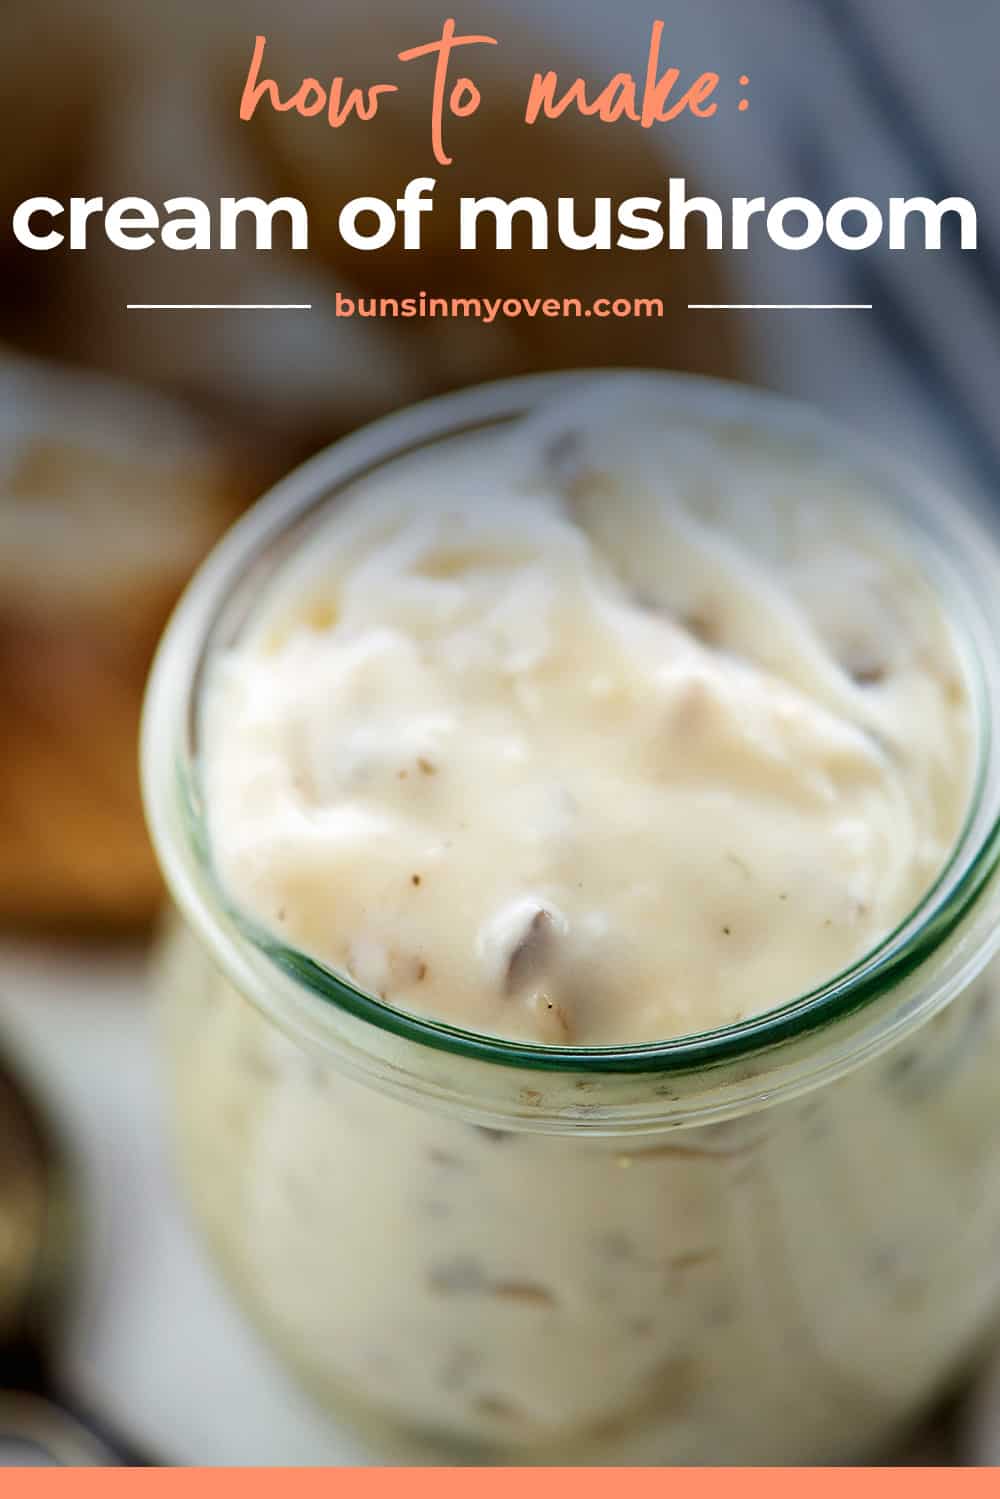 Jar of cream of mushroom soup with text for Pinterest.